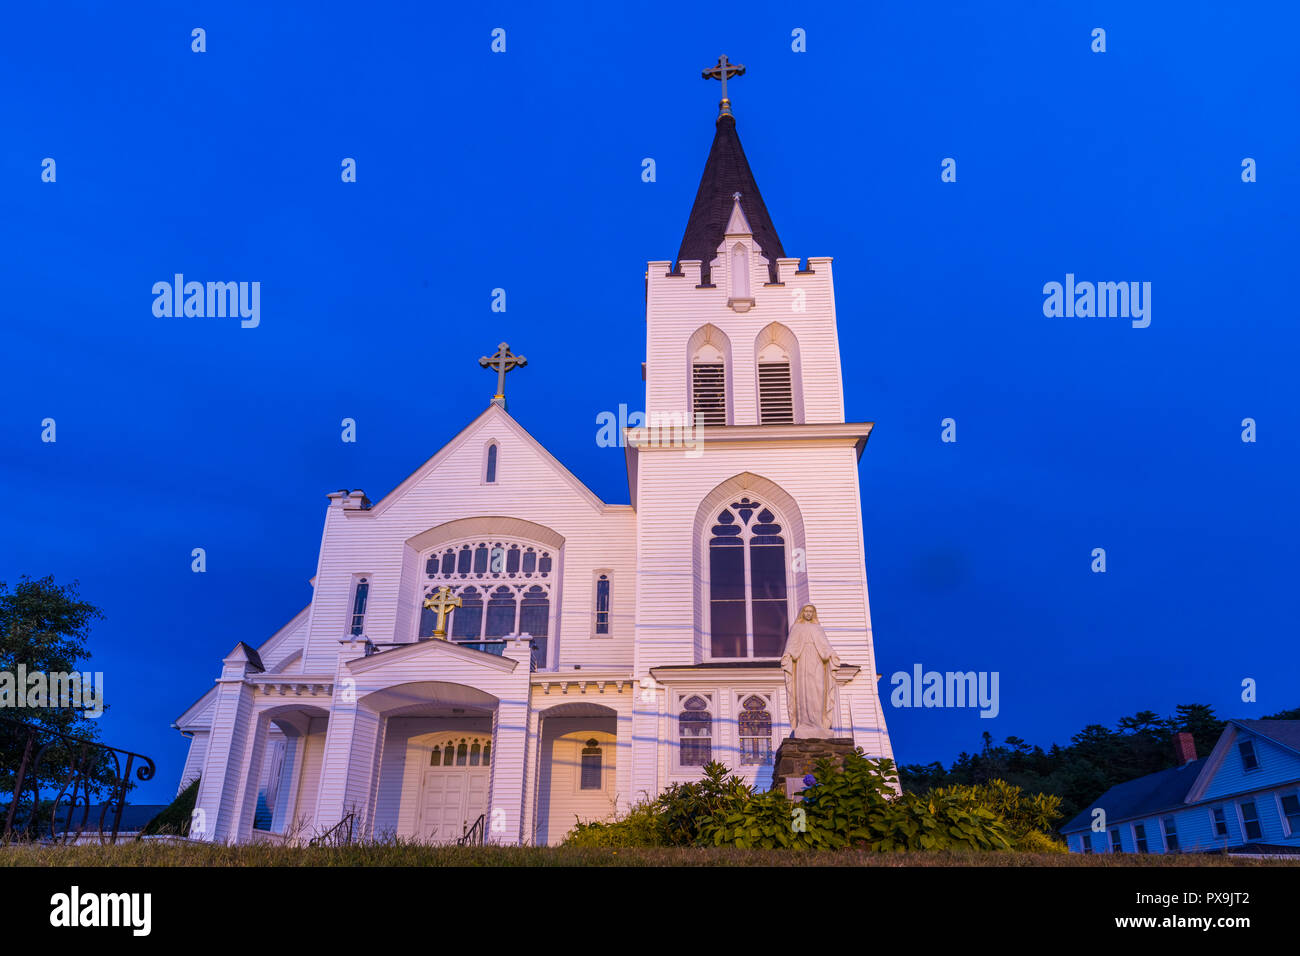 Our Lady Queen of Peace Catholic Church lit at night in Boothbay Harbor Maine Stock Photo